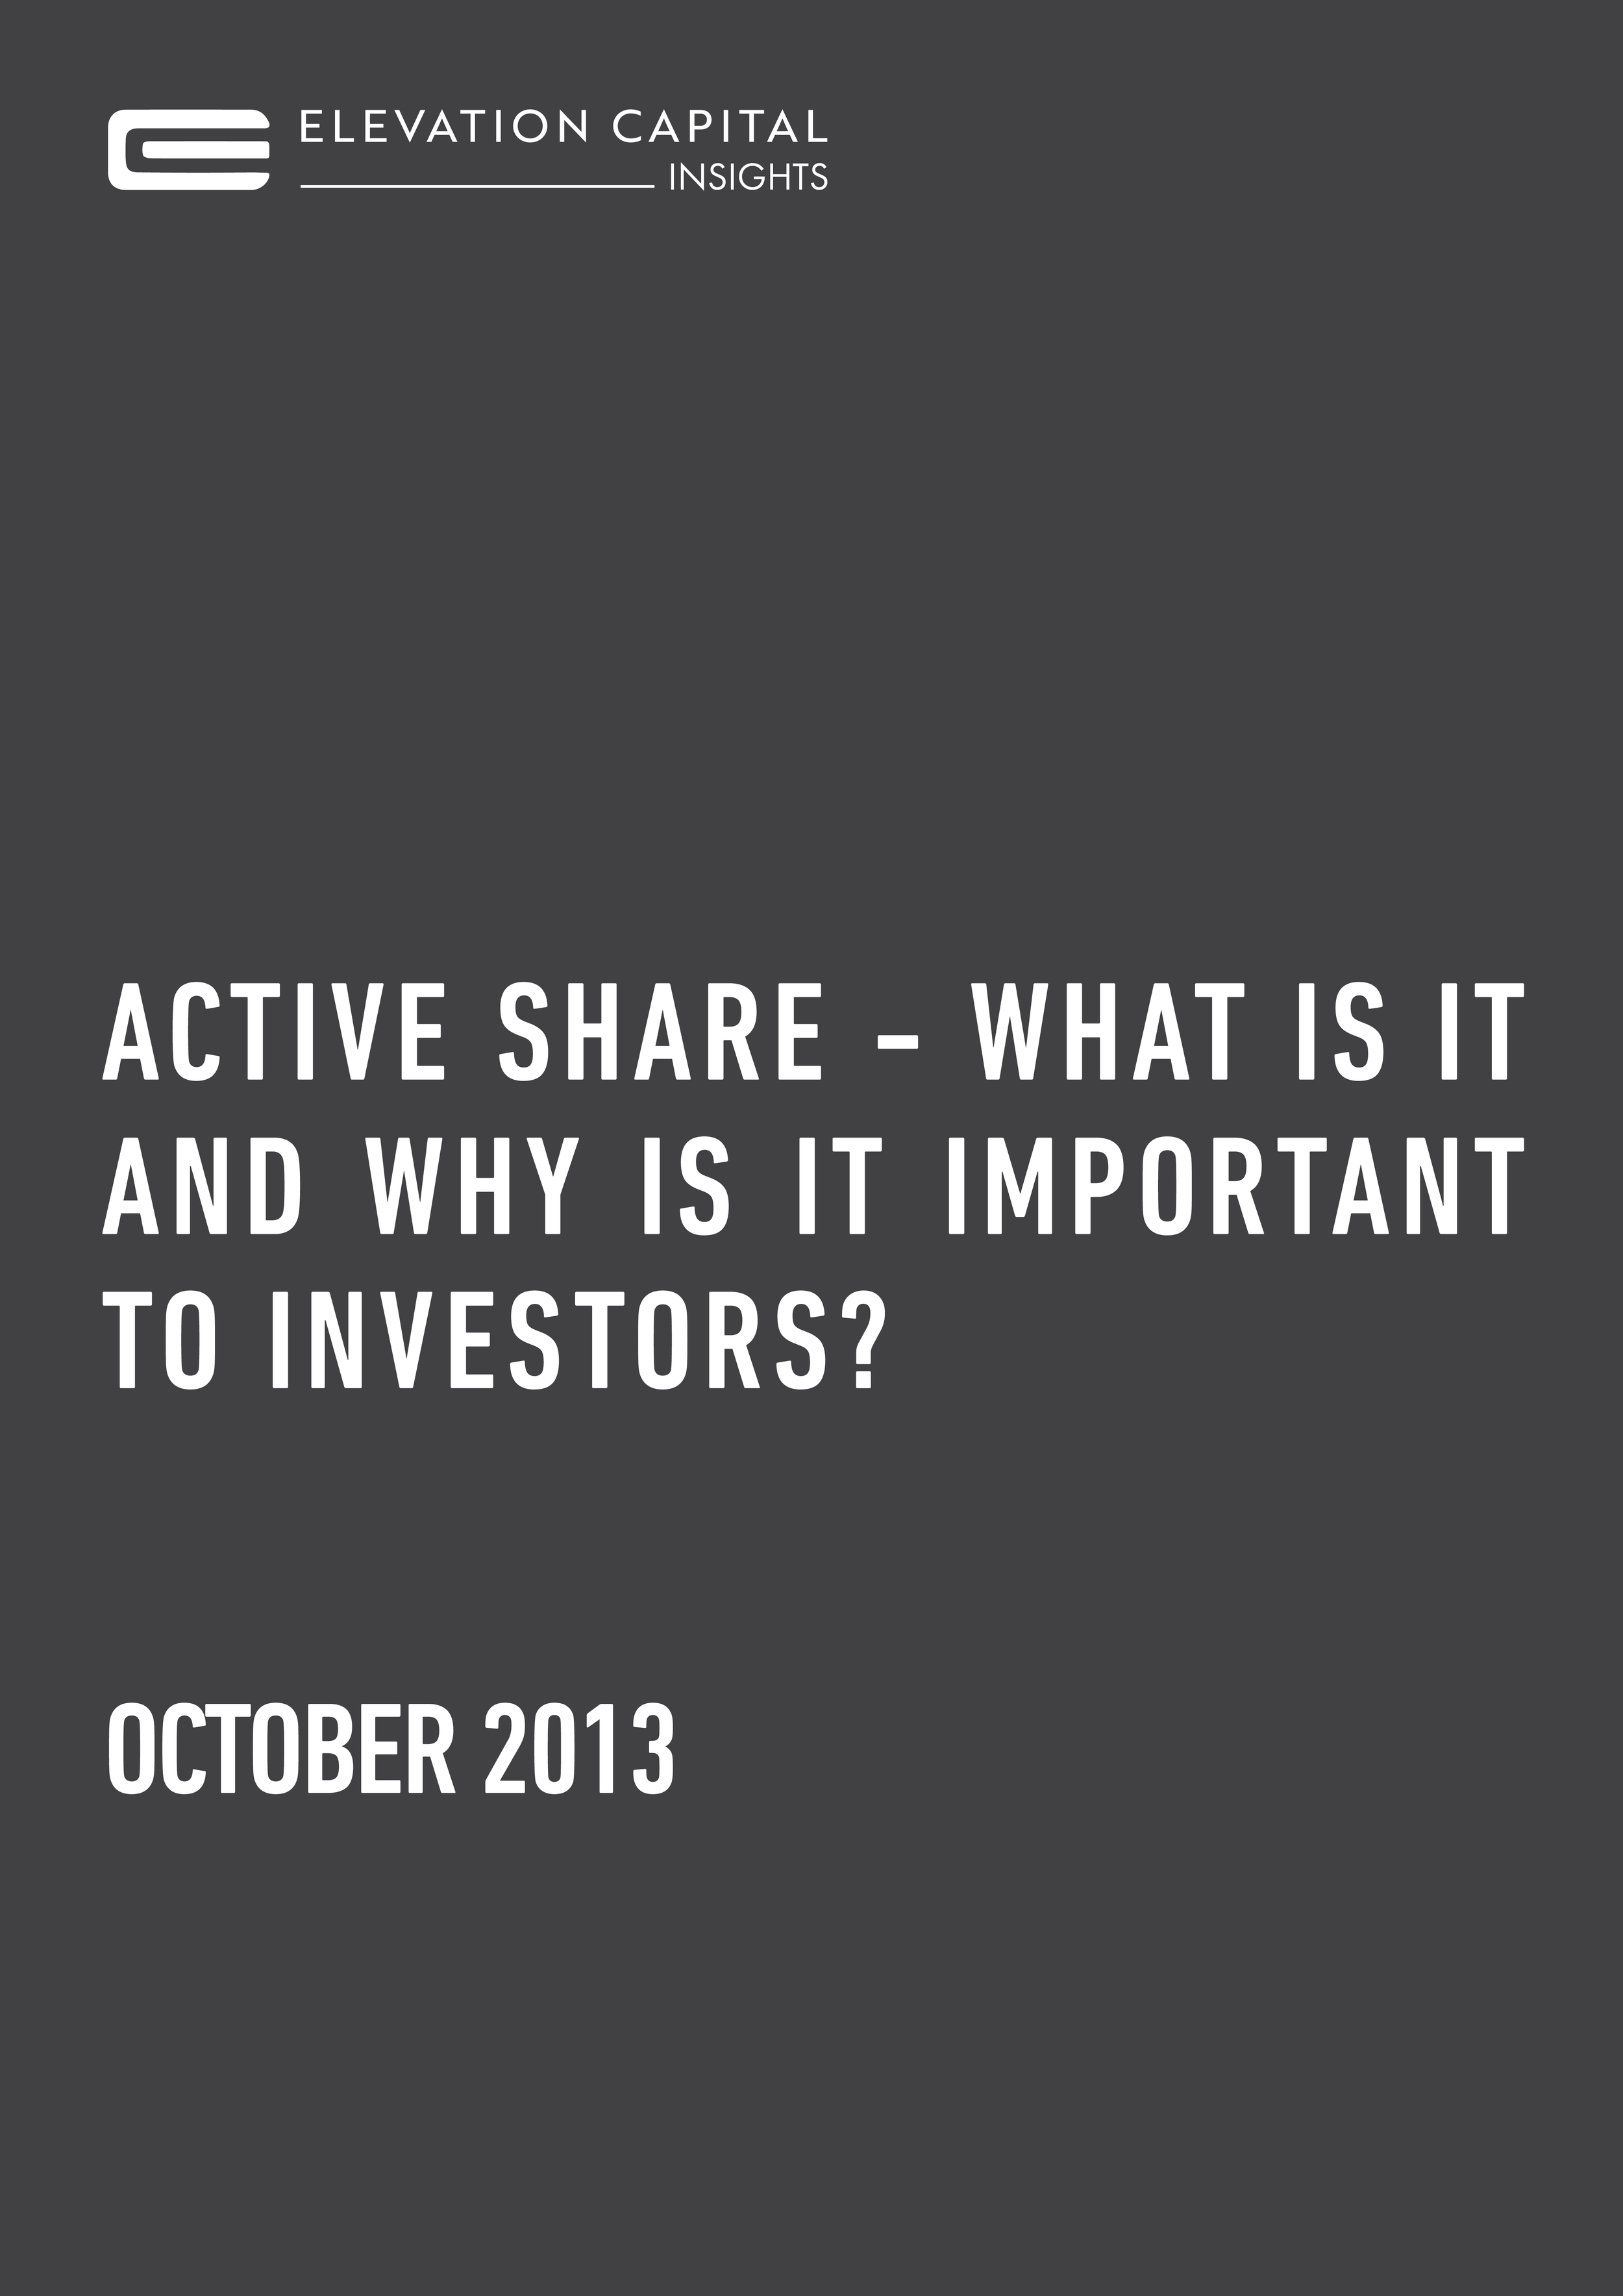 Active Share - What is it and why is it important to investors?